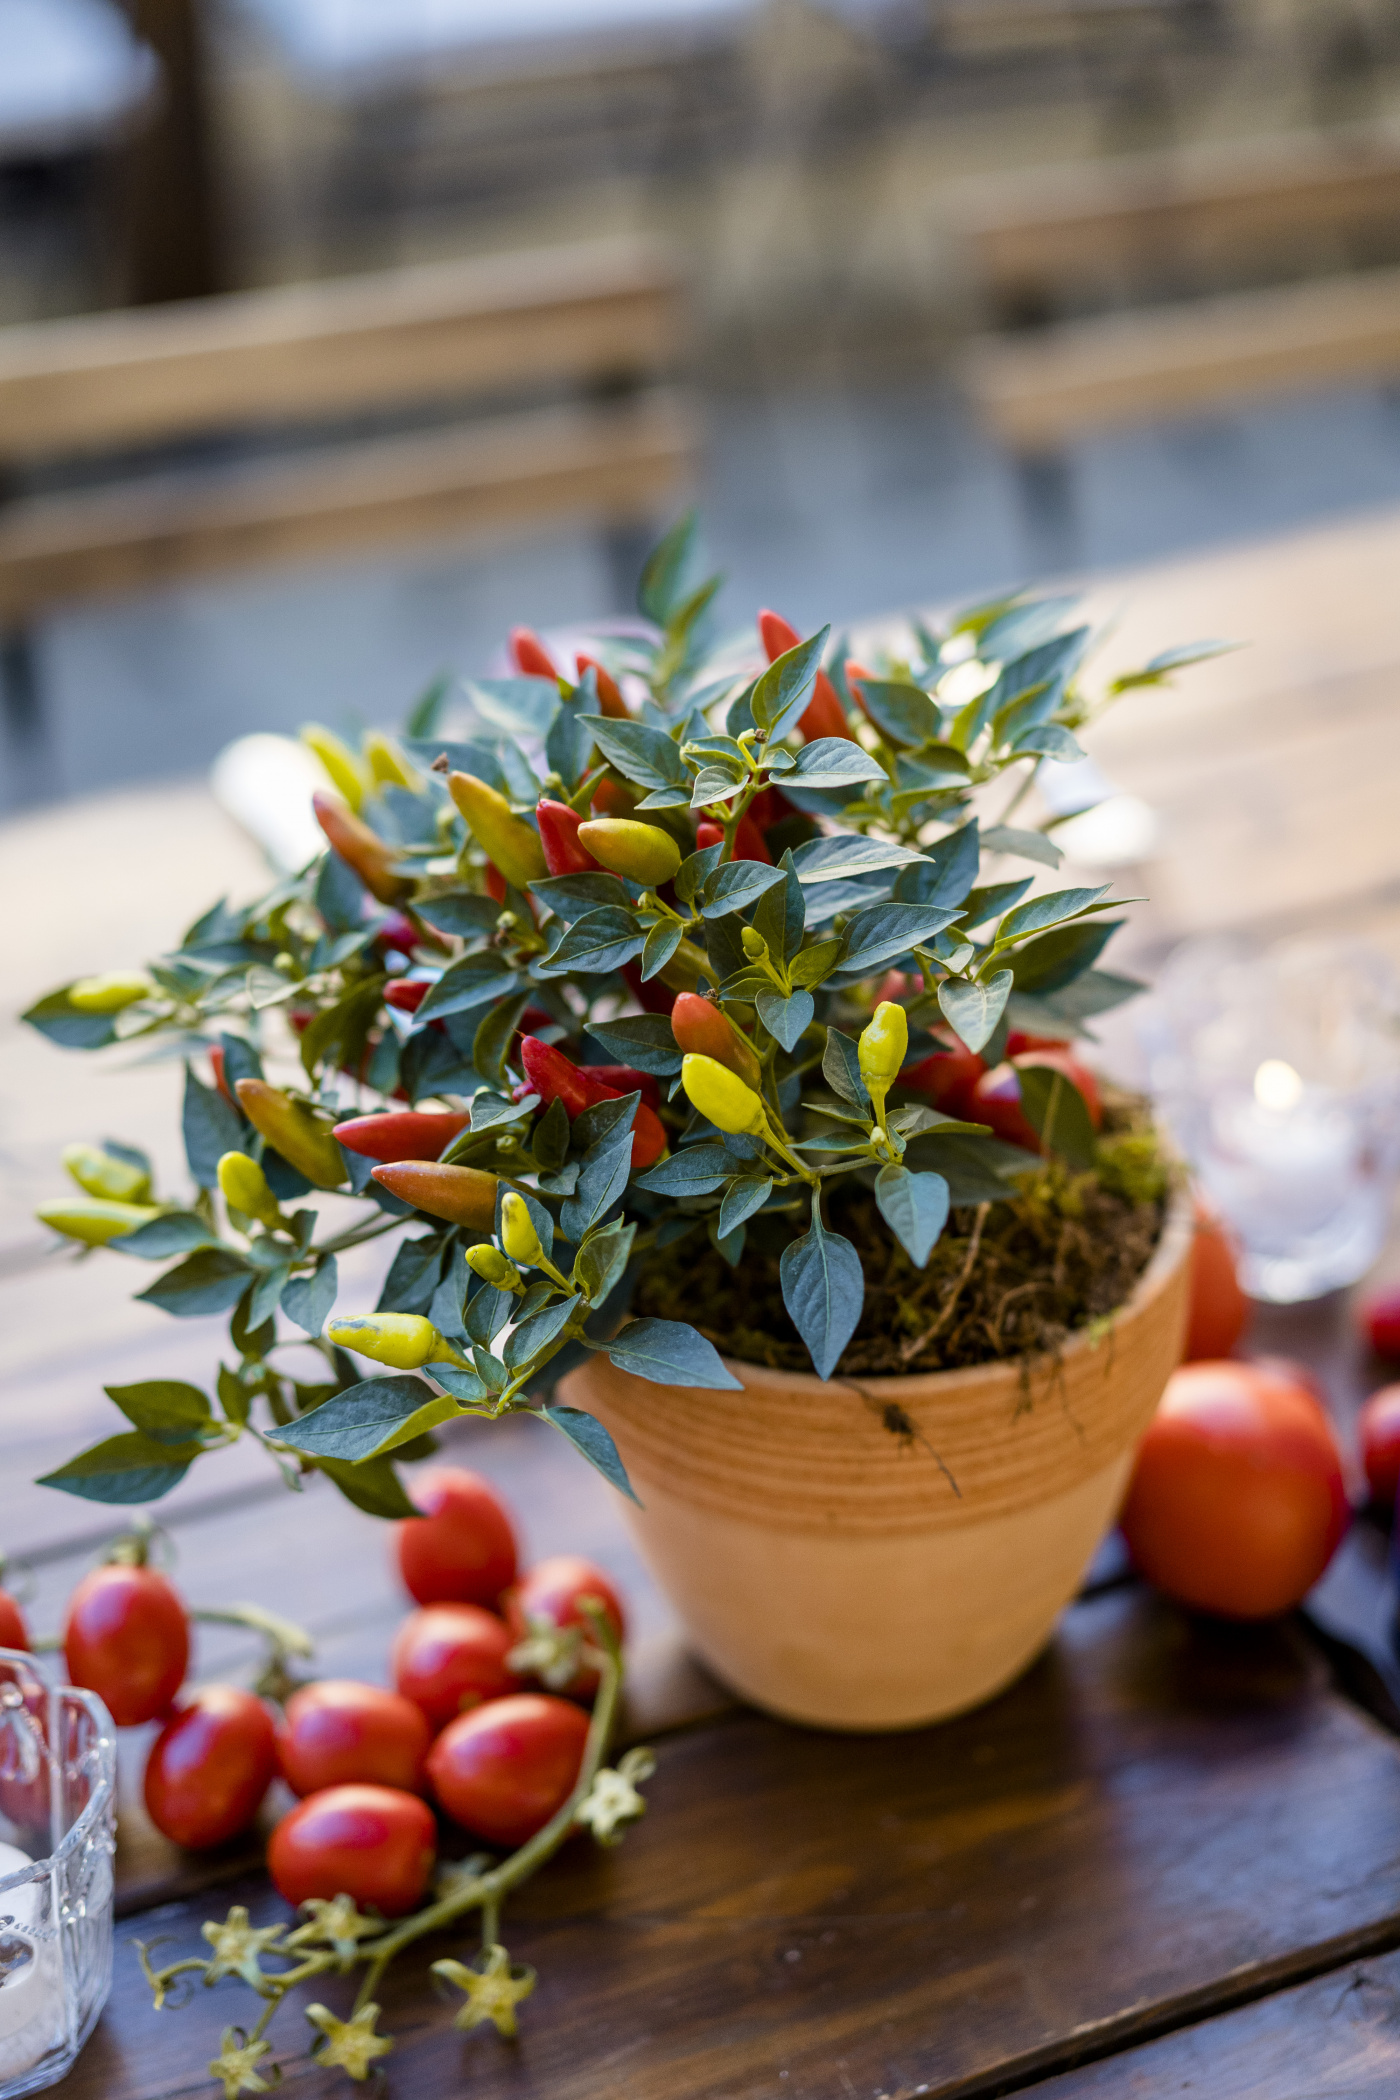 Herbs and peppers as decor for a rustic chic welcome night